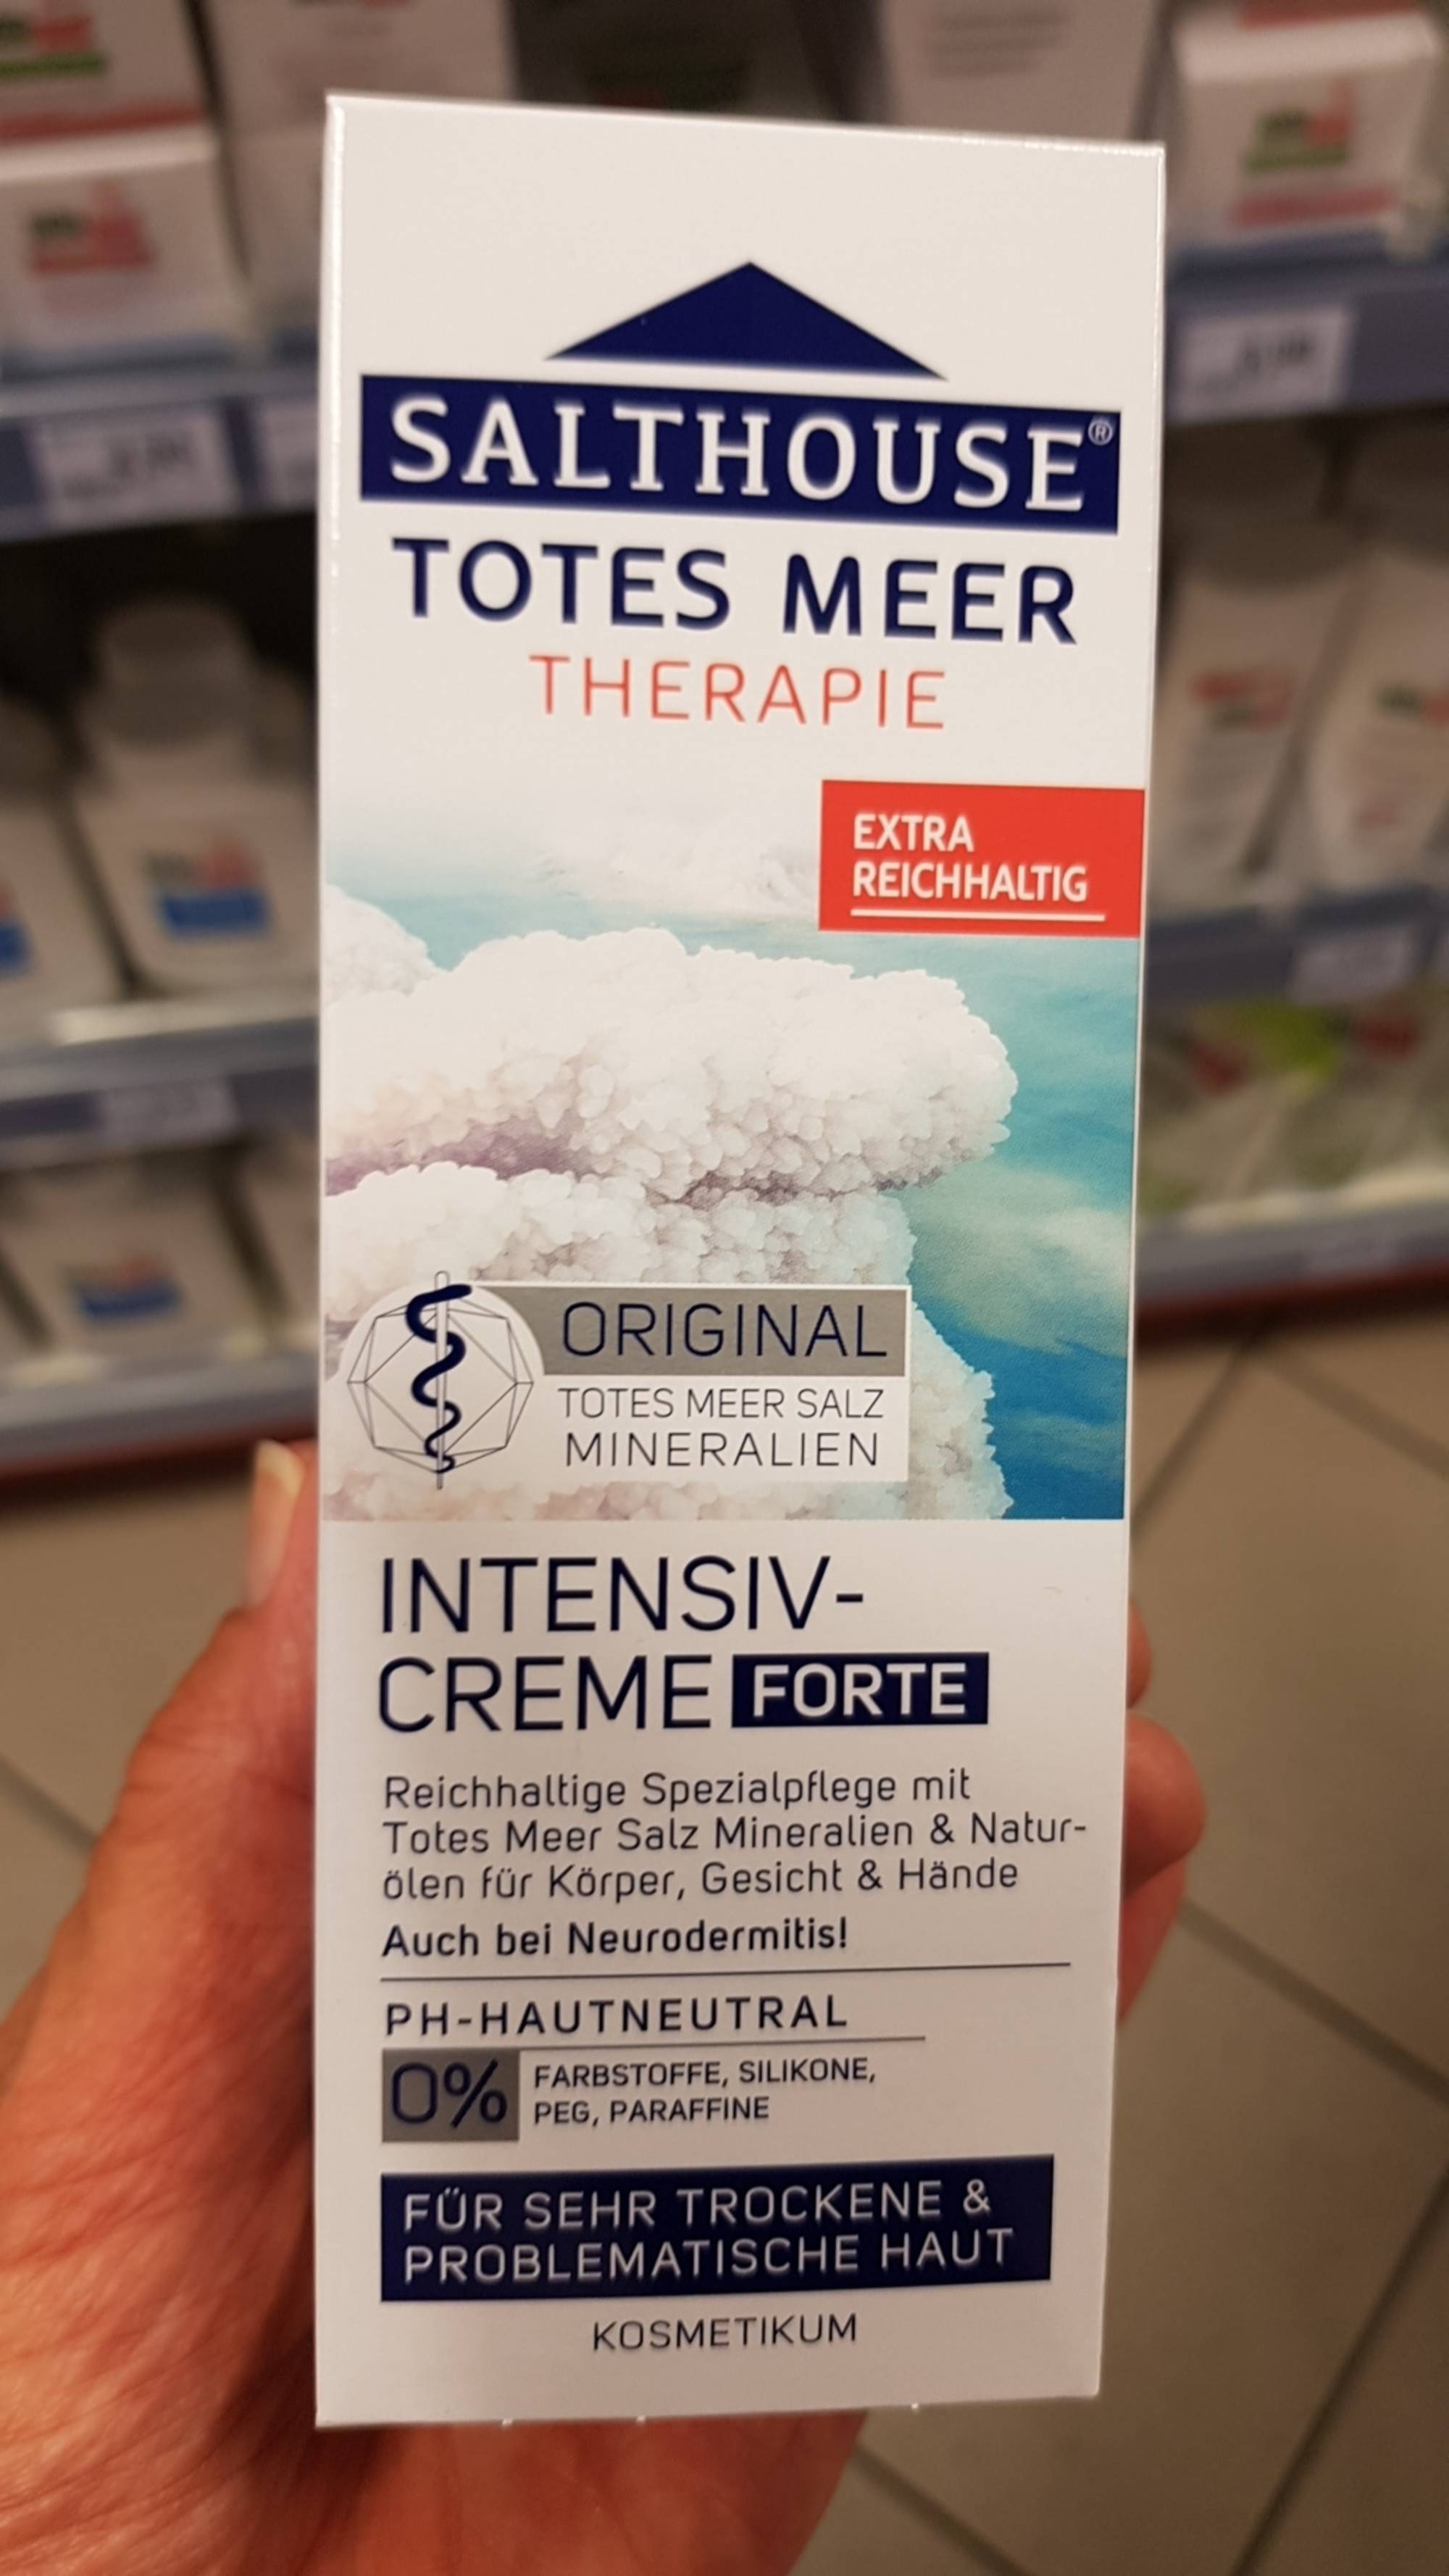 SALTHOUSE - Totes meer therapie - Intensiv-creme forte